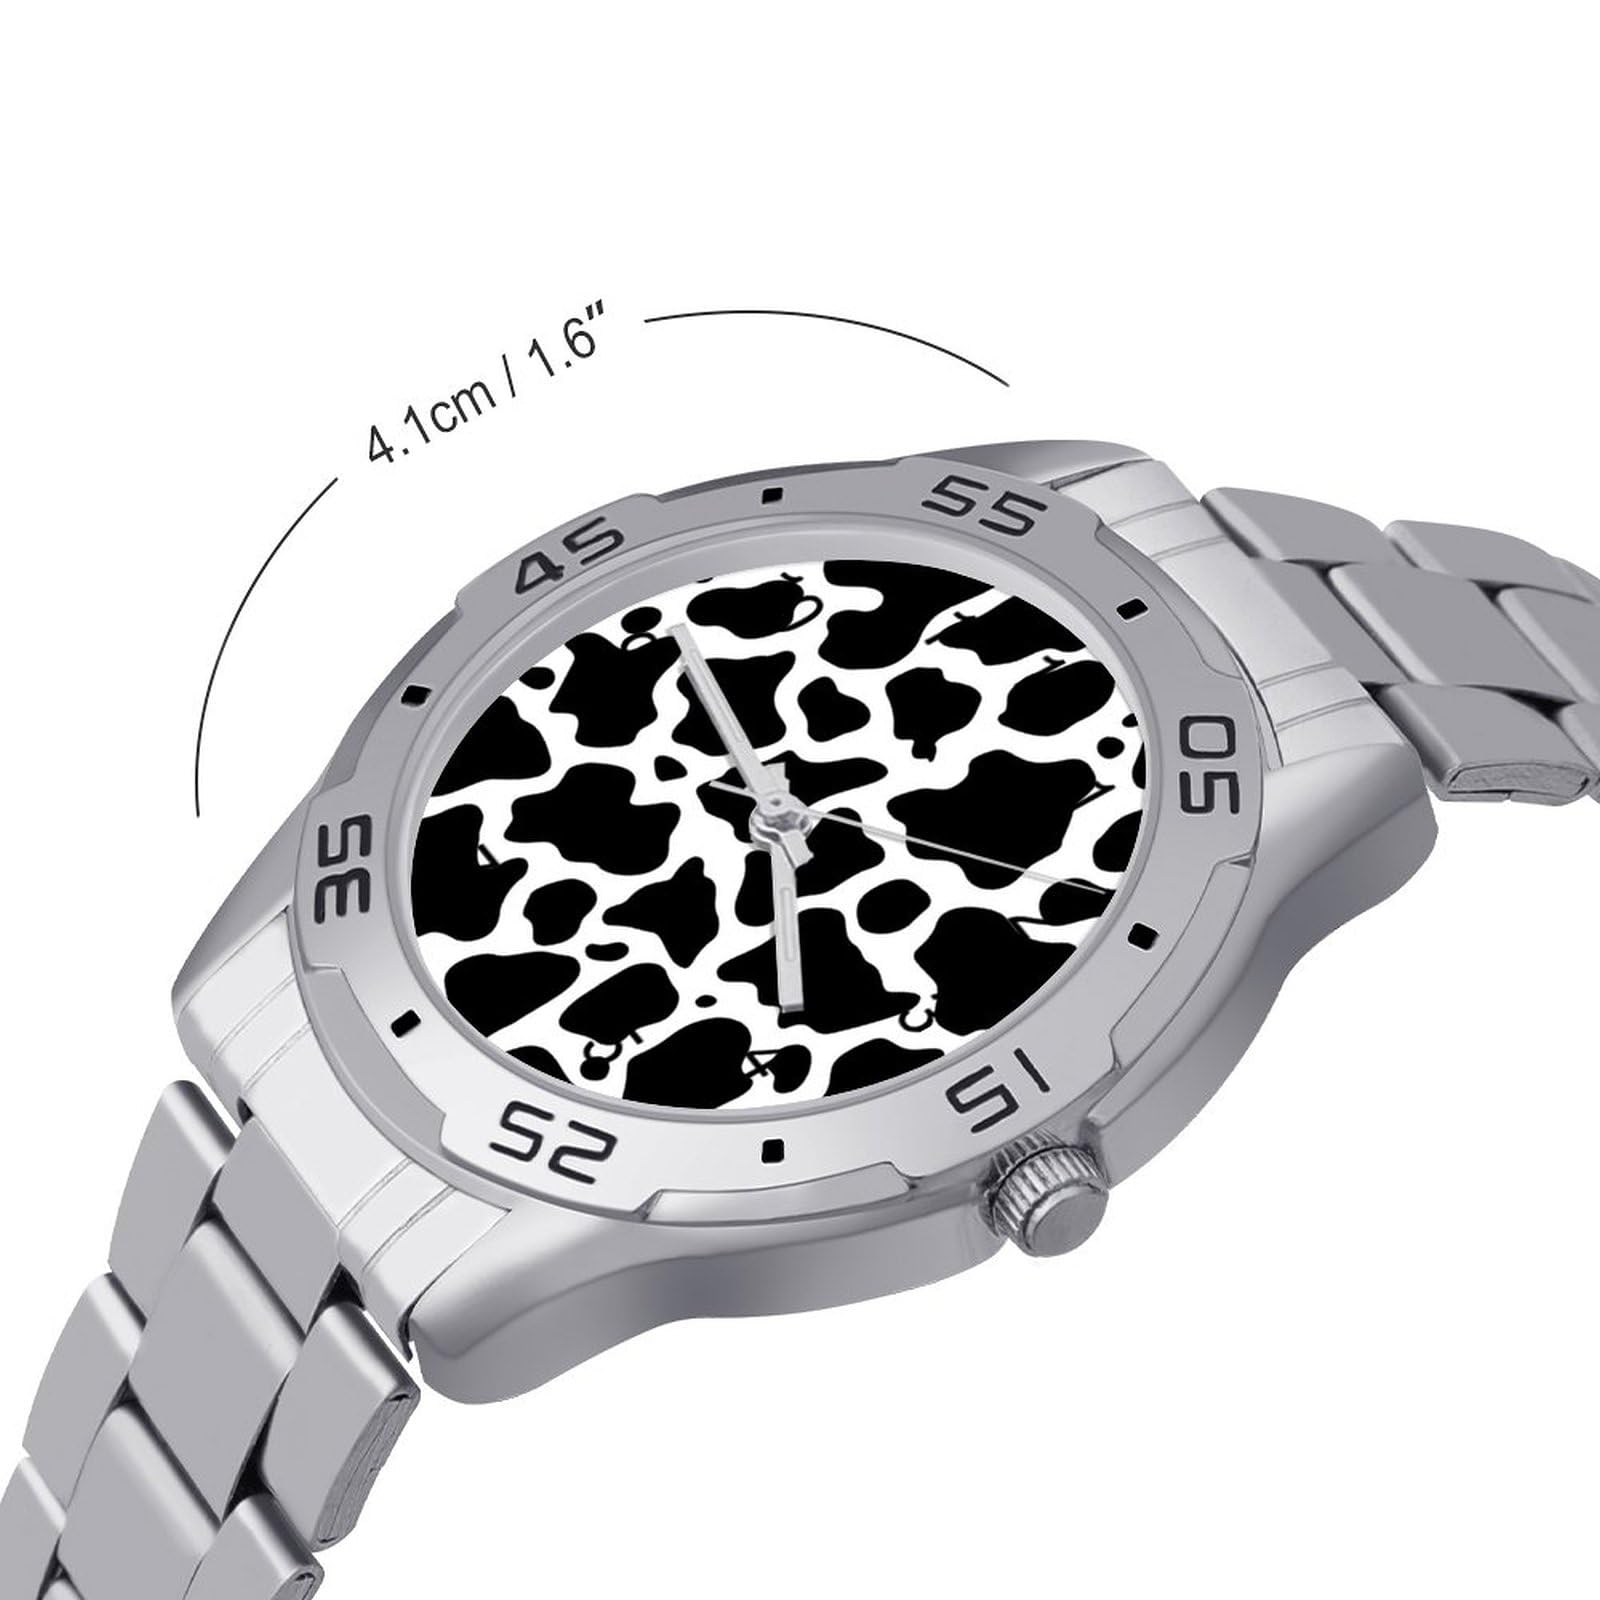 Cow Pattern Stainless Steel Band Business Watch Dress Wrist Unique Luxury Work Casual Waterproof Watches